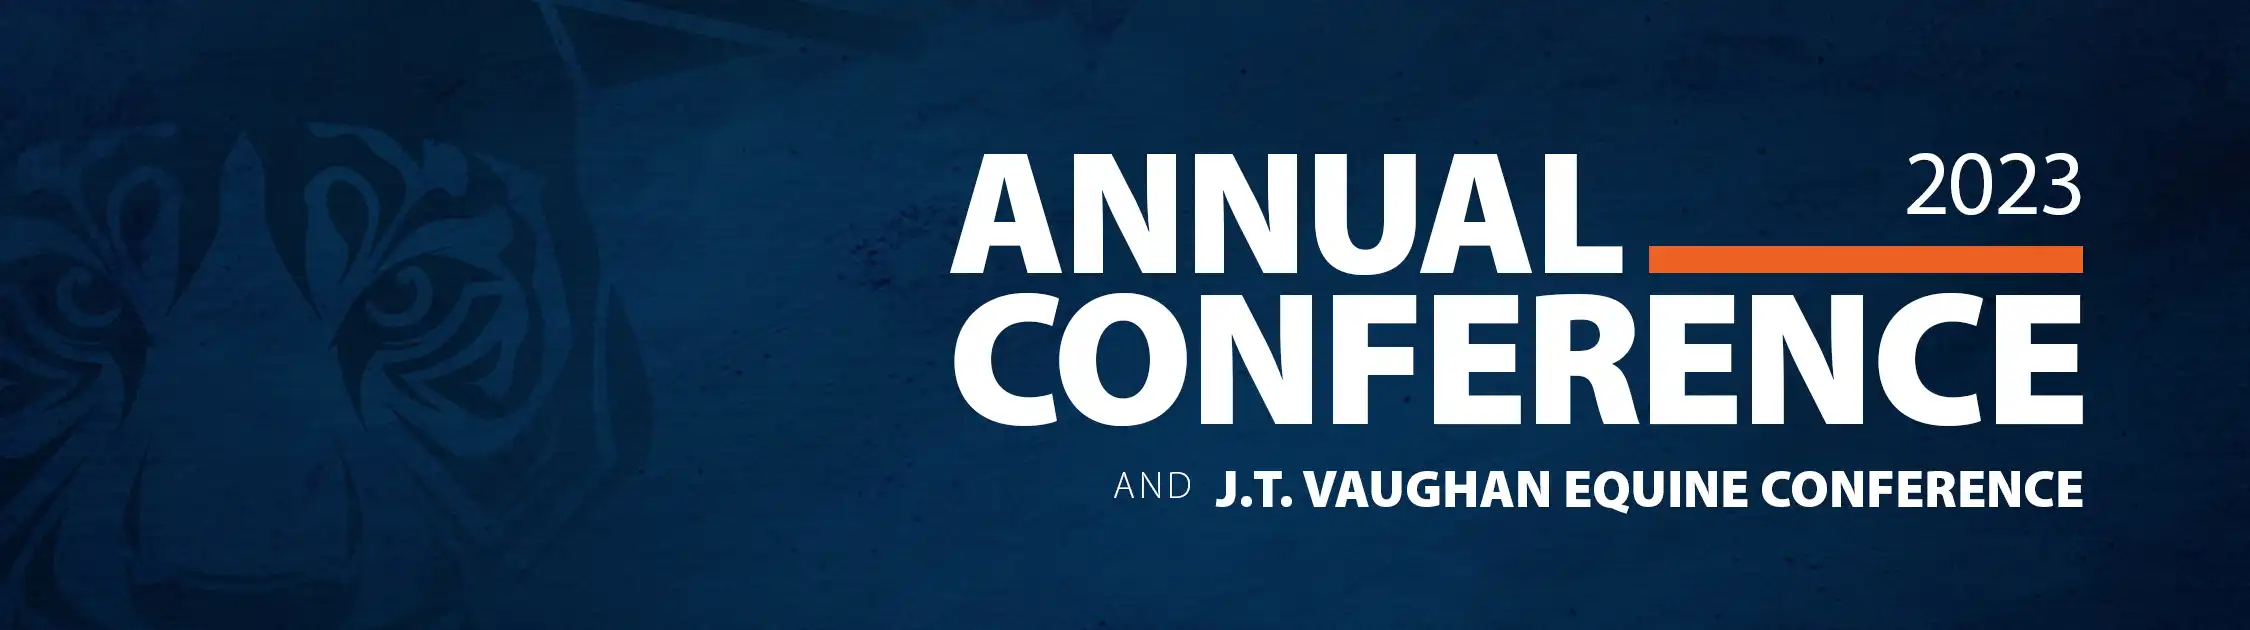 2023 Annual Conference and the J.T. Vaughn Equine Conference